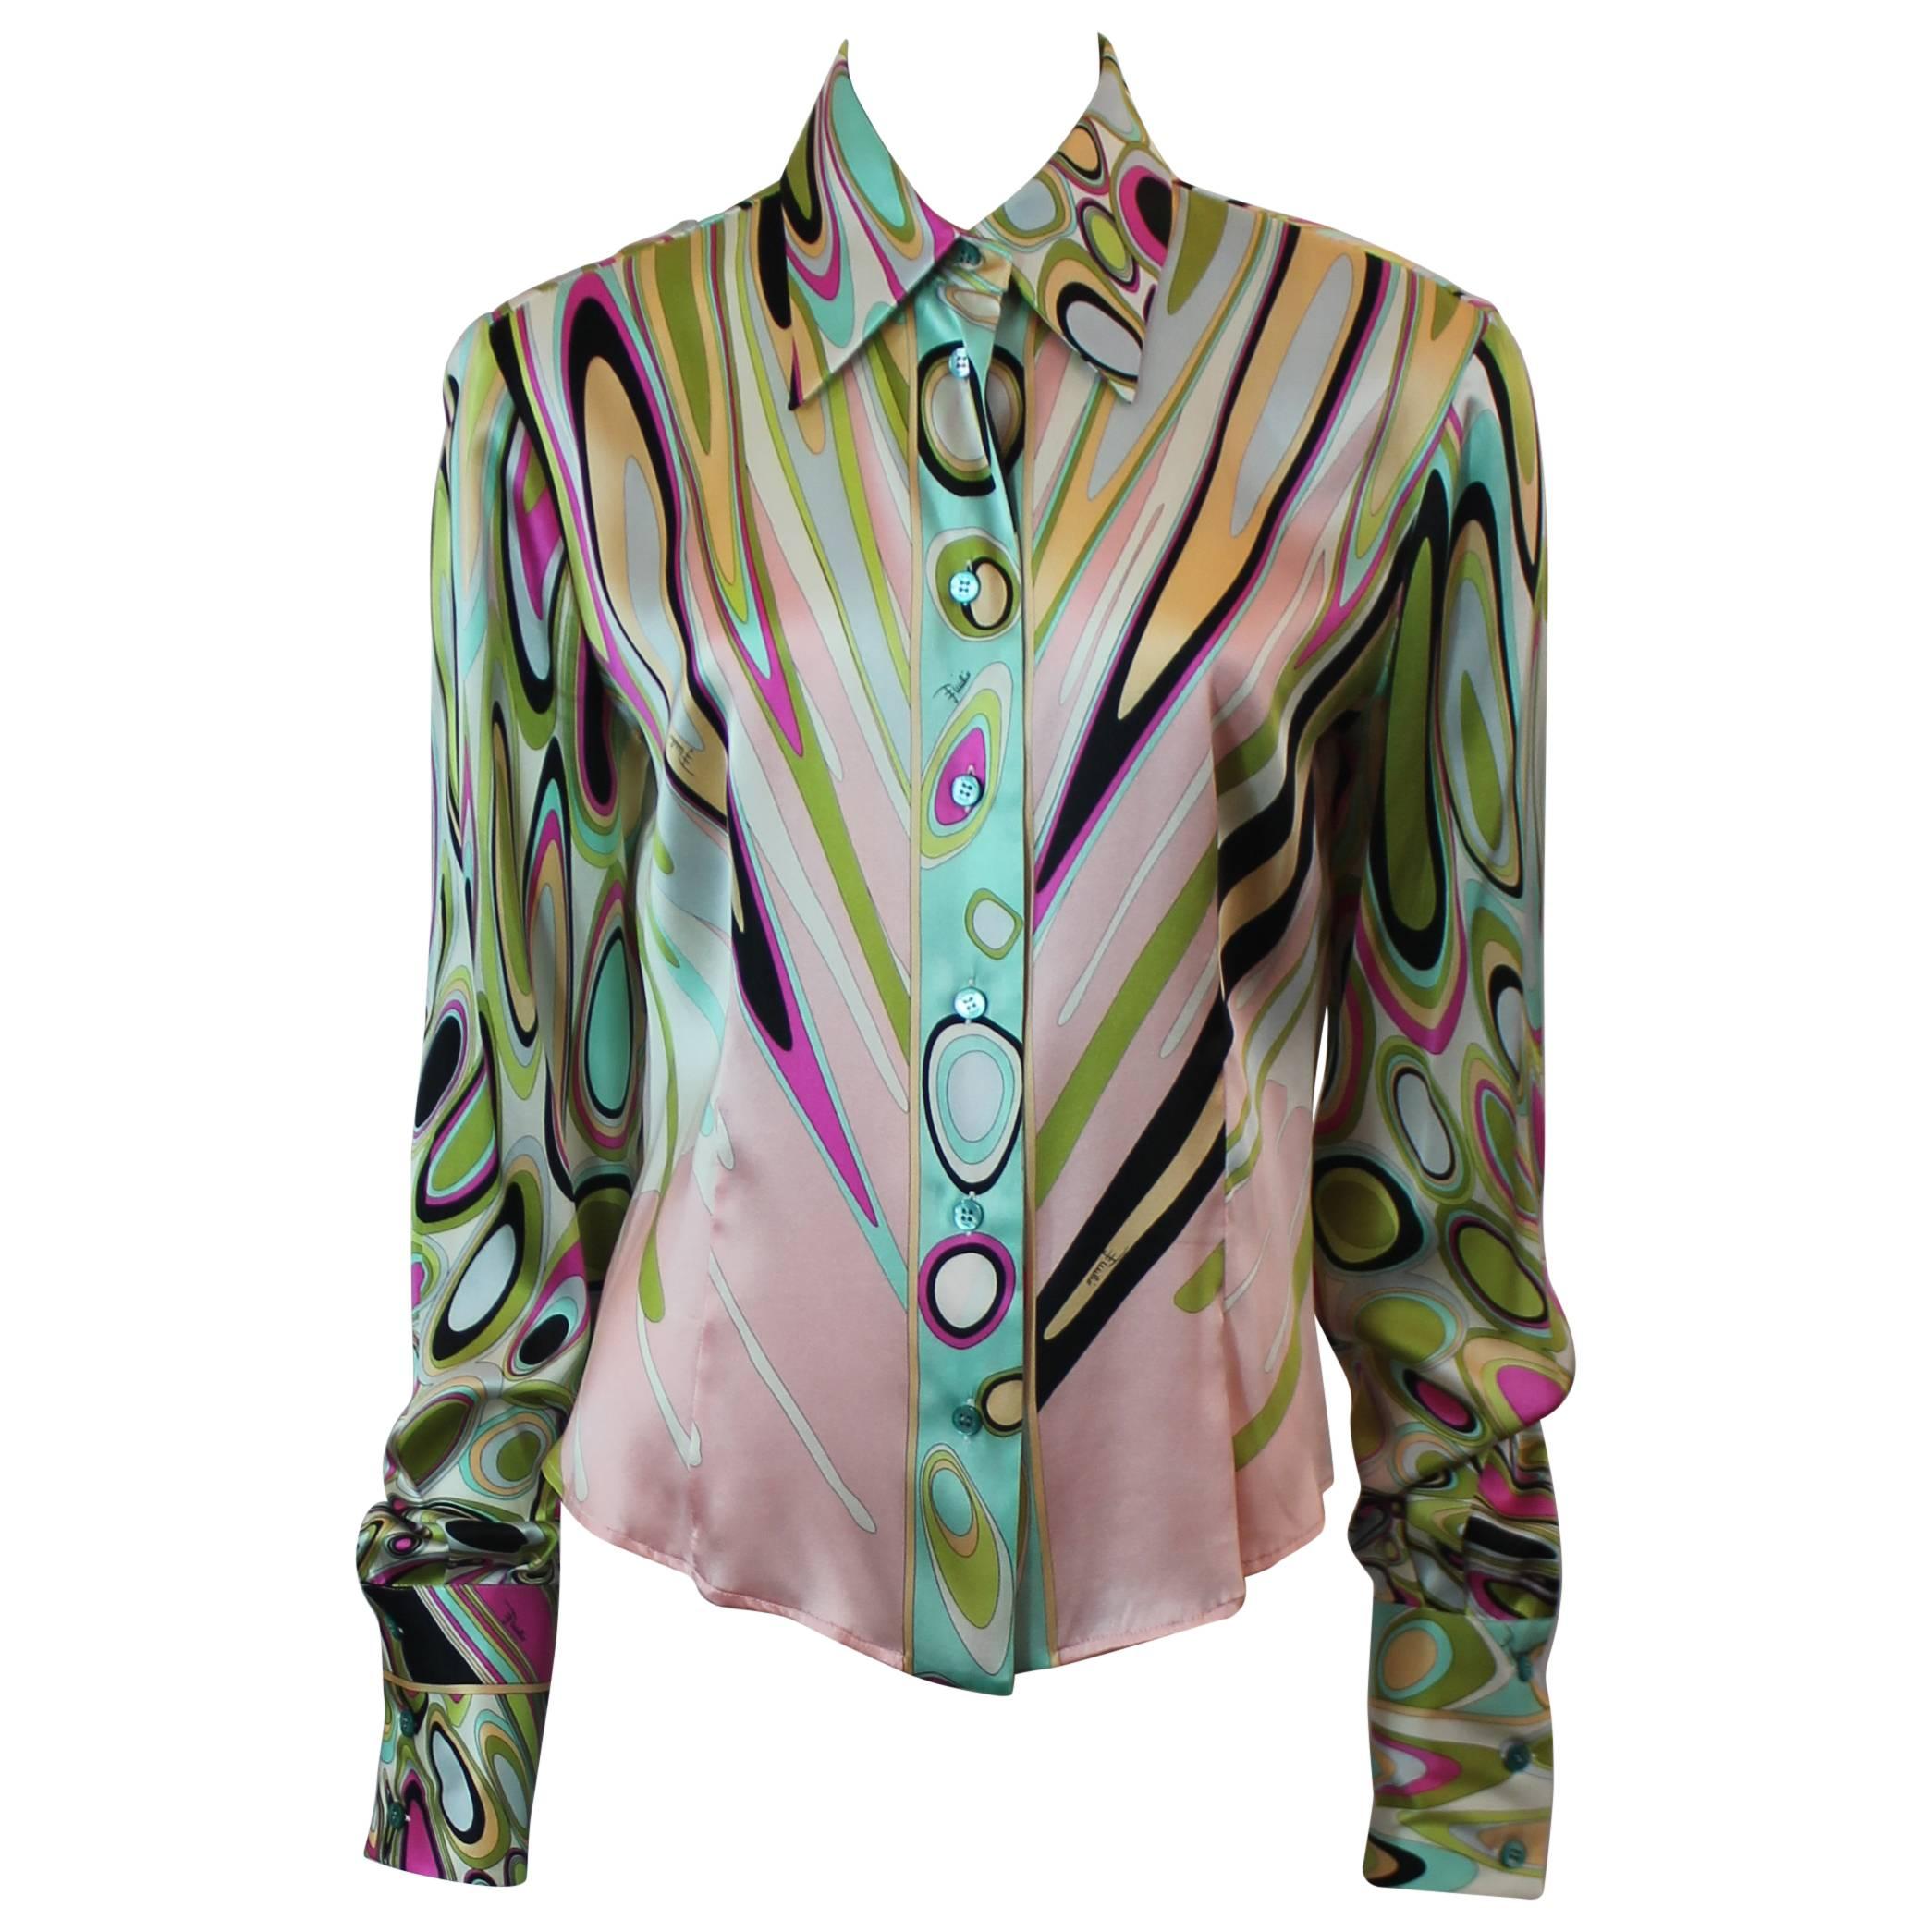 Emilio Pucci Multi-Colored Silk Shimmery Printed Long Sleeve Shirt - 12